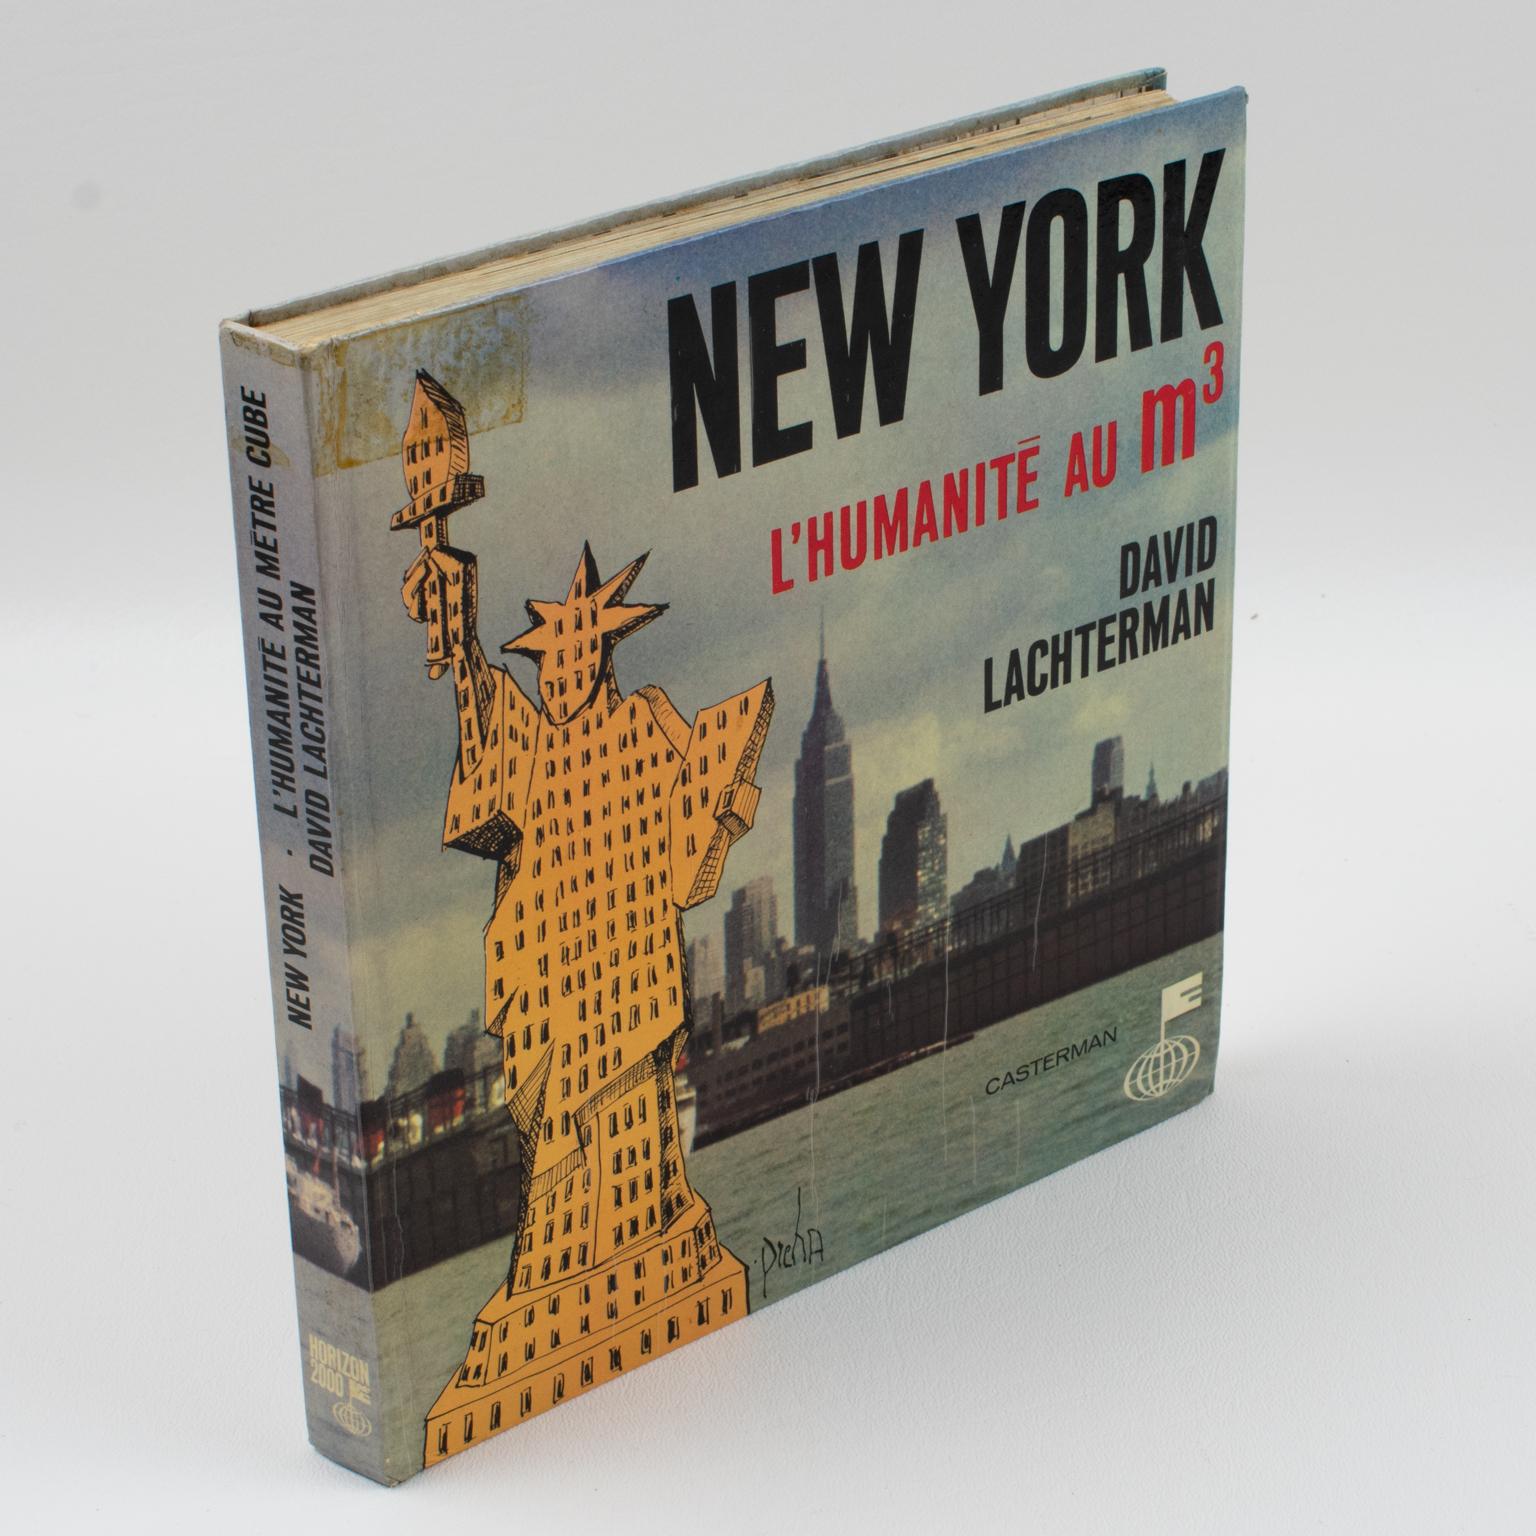 New York, L'Humanite au Metre Cube (New York, Humanity by Cubic Foot), French book by David Lachterman, 1966.
About this book, the author said: 